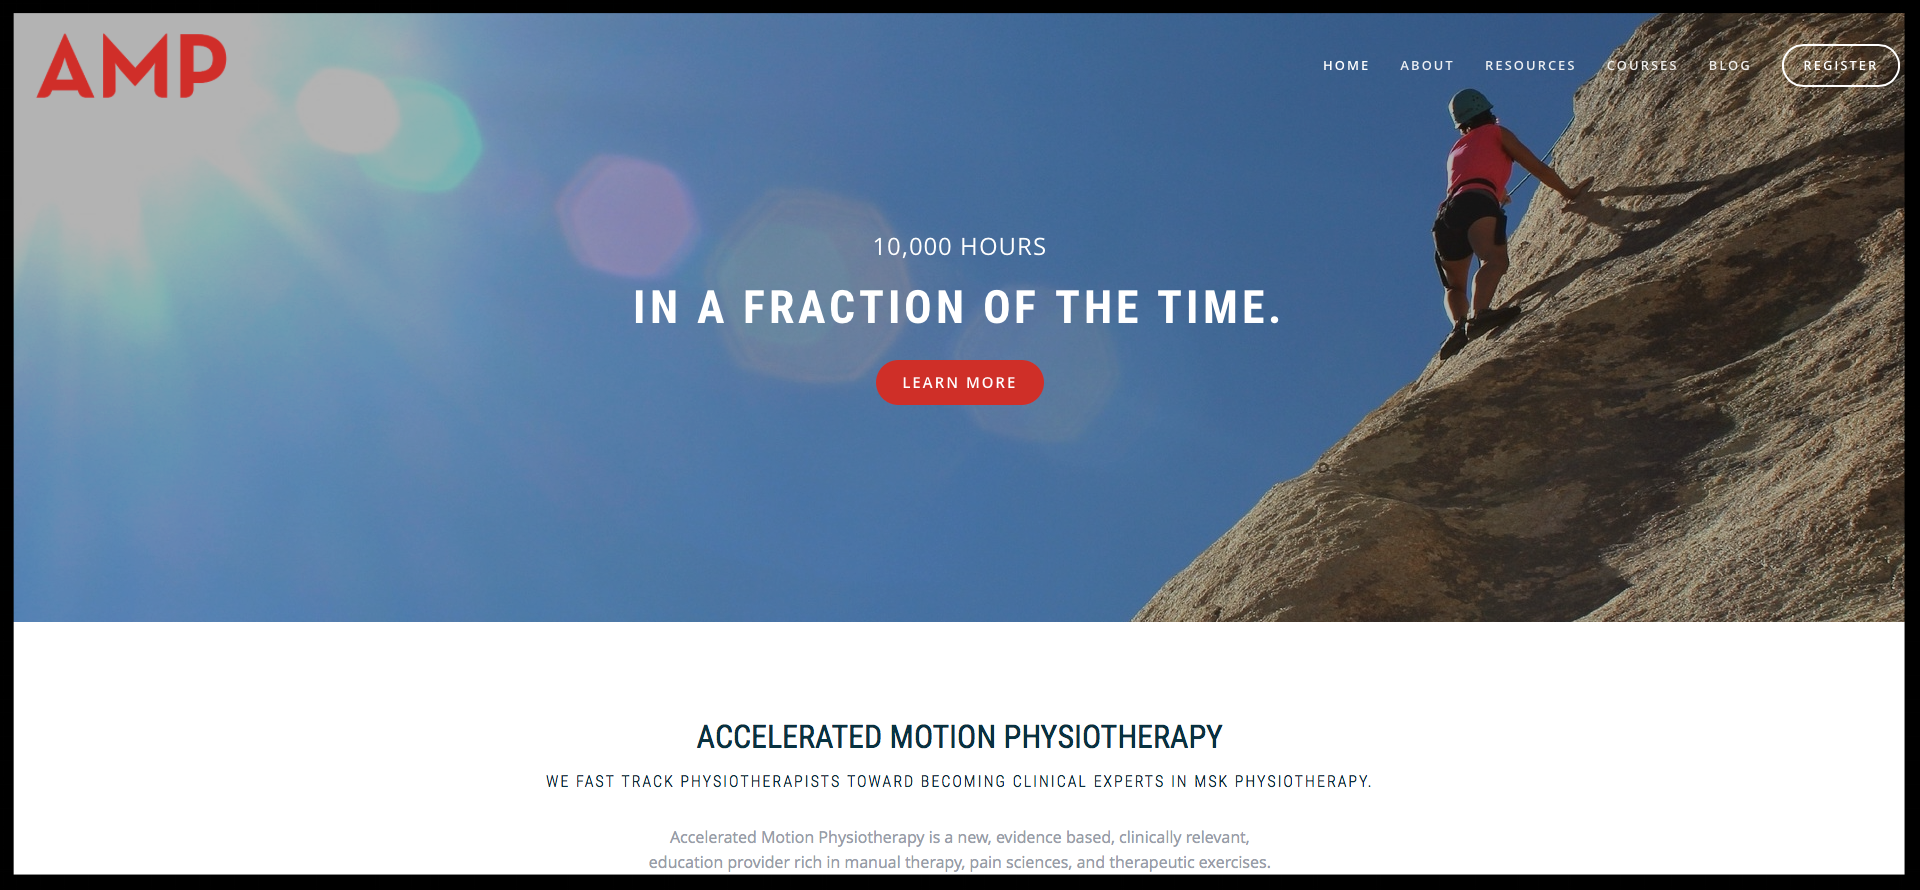 Accelerated Motion Physiotherapy